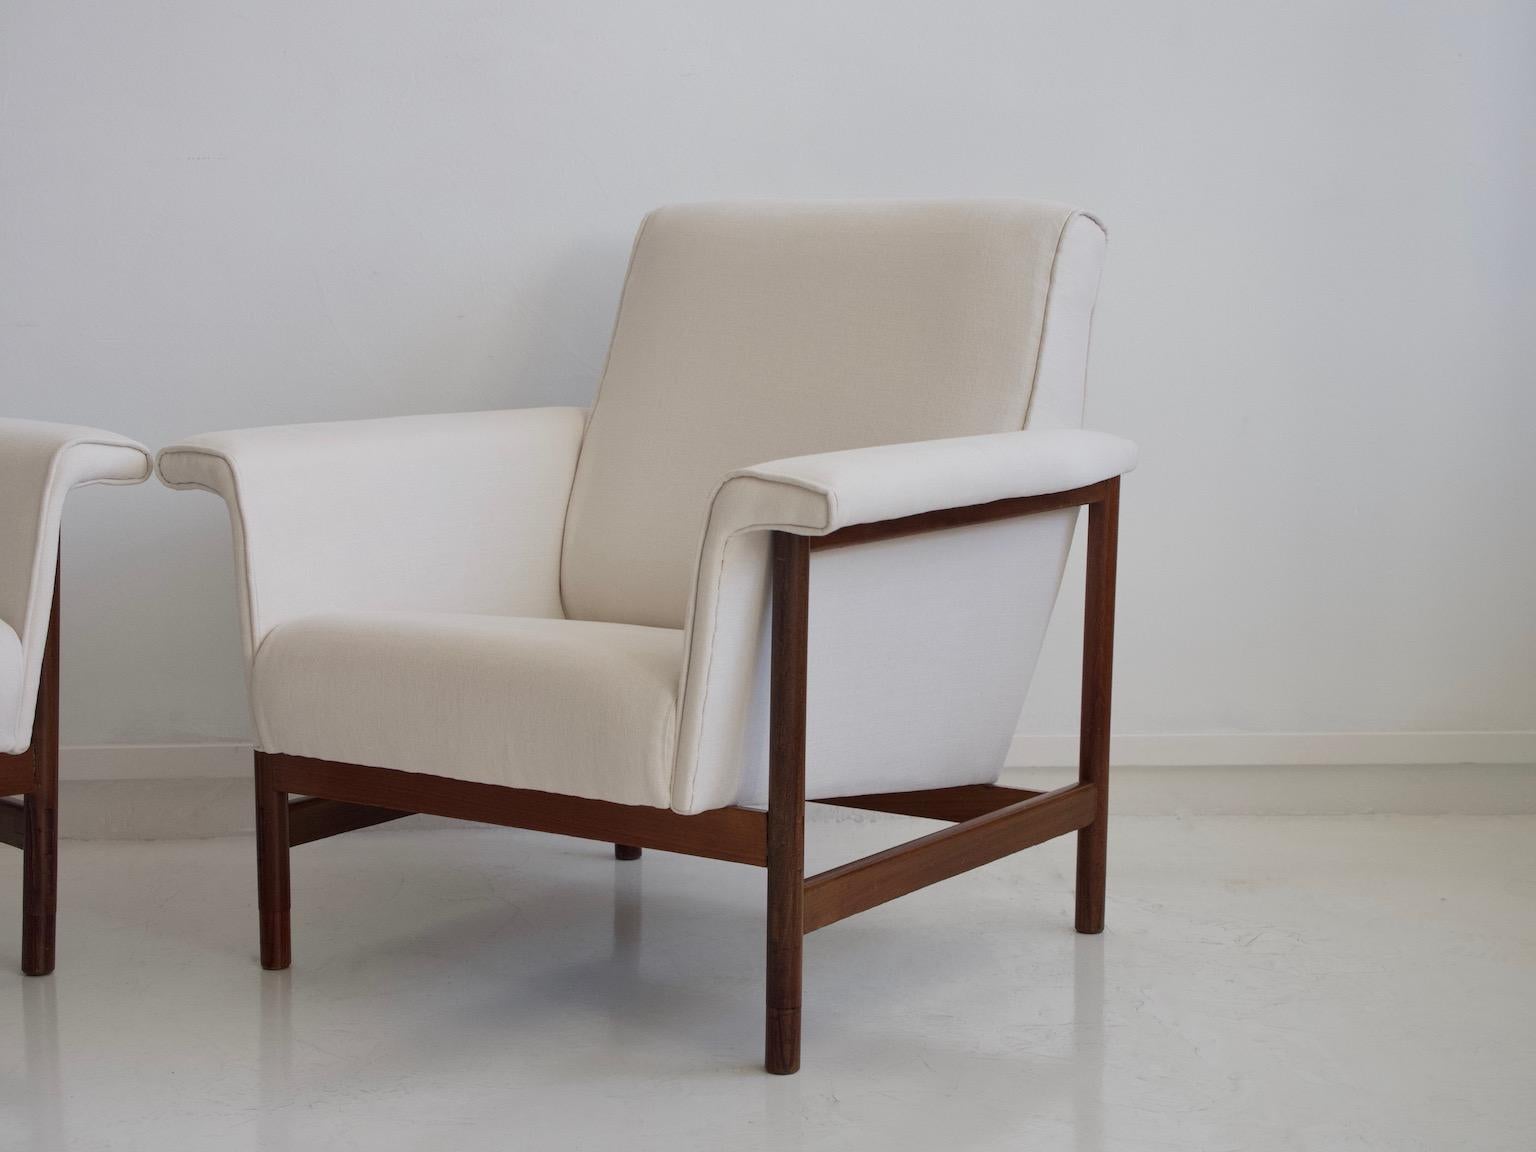 Italian Pair of White Armchairs with Wooden Frame